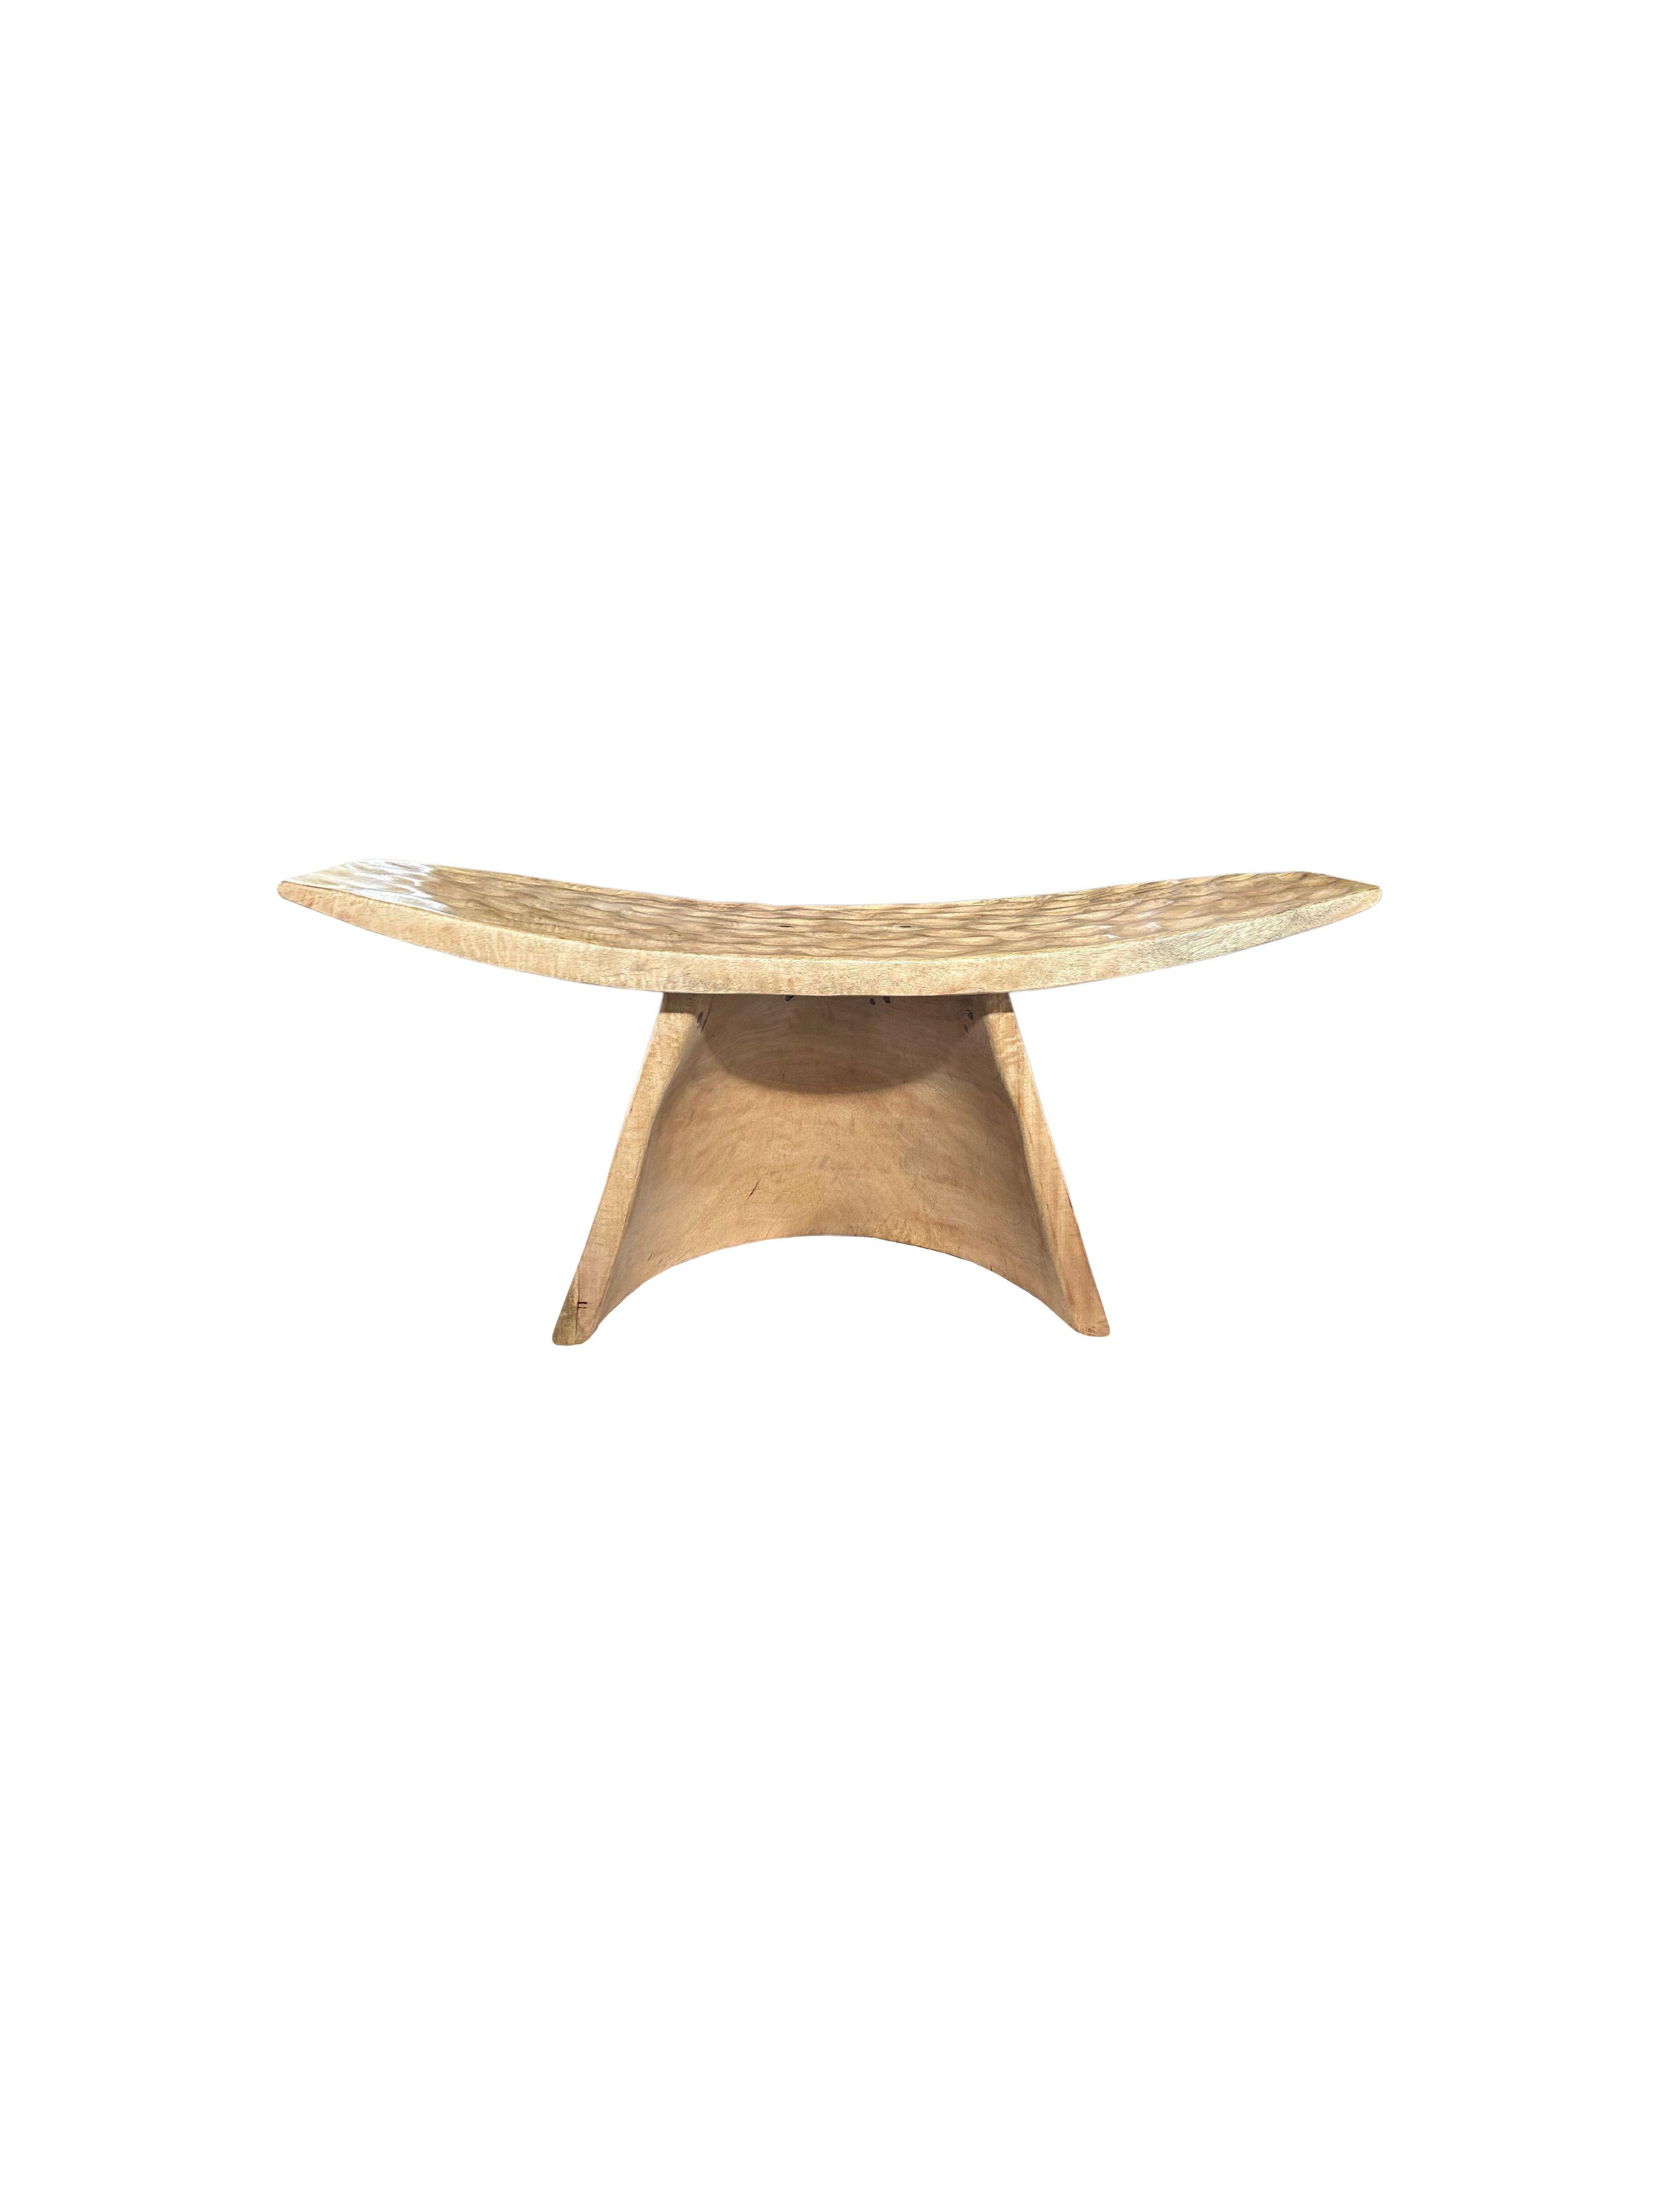 A wonderfully sculptural stool with a curved seat and hand hewn detailing. The stool's neutral pigment and subtle wood texture makes it perfect for any space. A uniquely sculptural and versatile piece. This stool was crafted from mango wood.

 